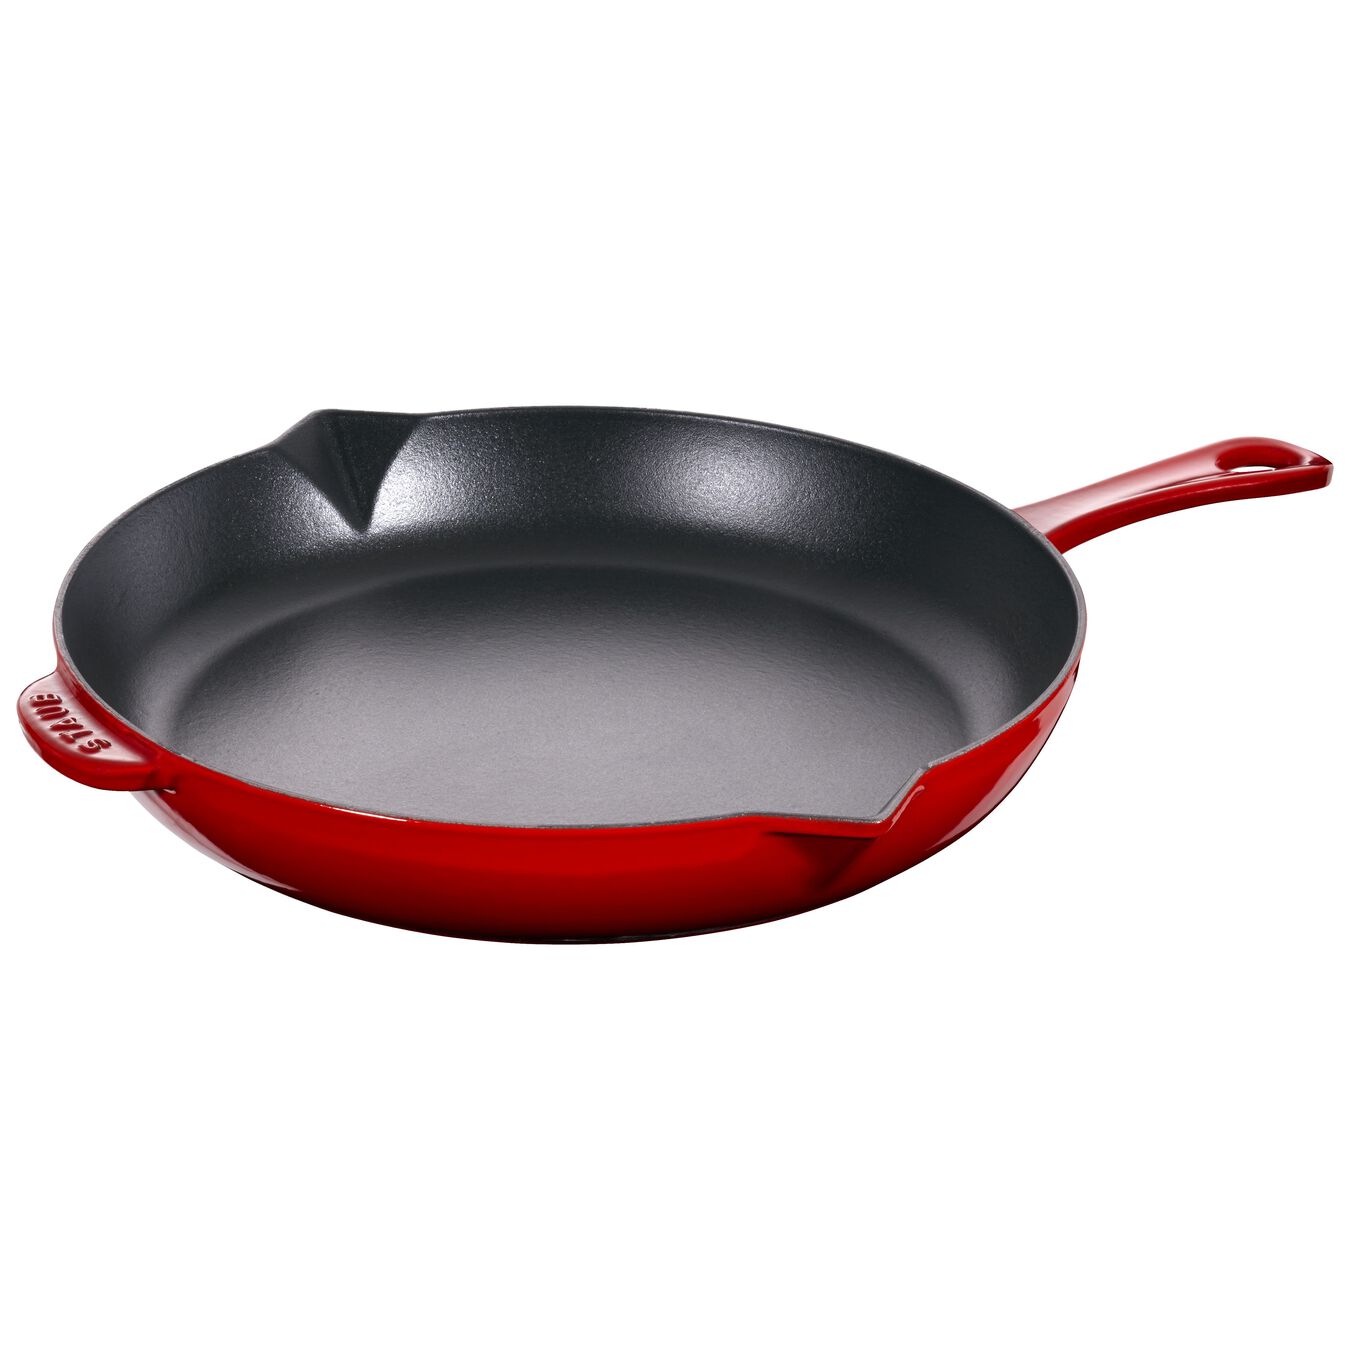 26 cm / 10 inch cast iron Frying pan with pouring spout, cherry - Visual Imperfections,,large 1